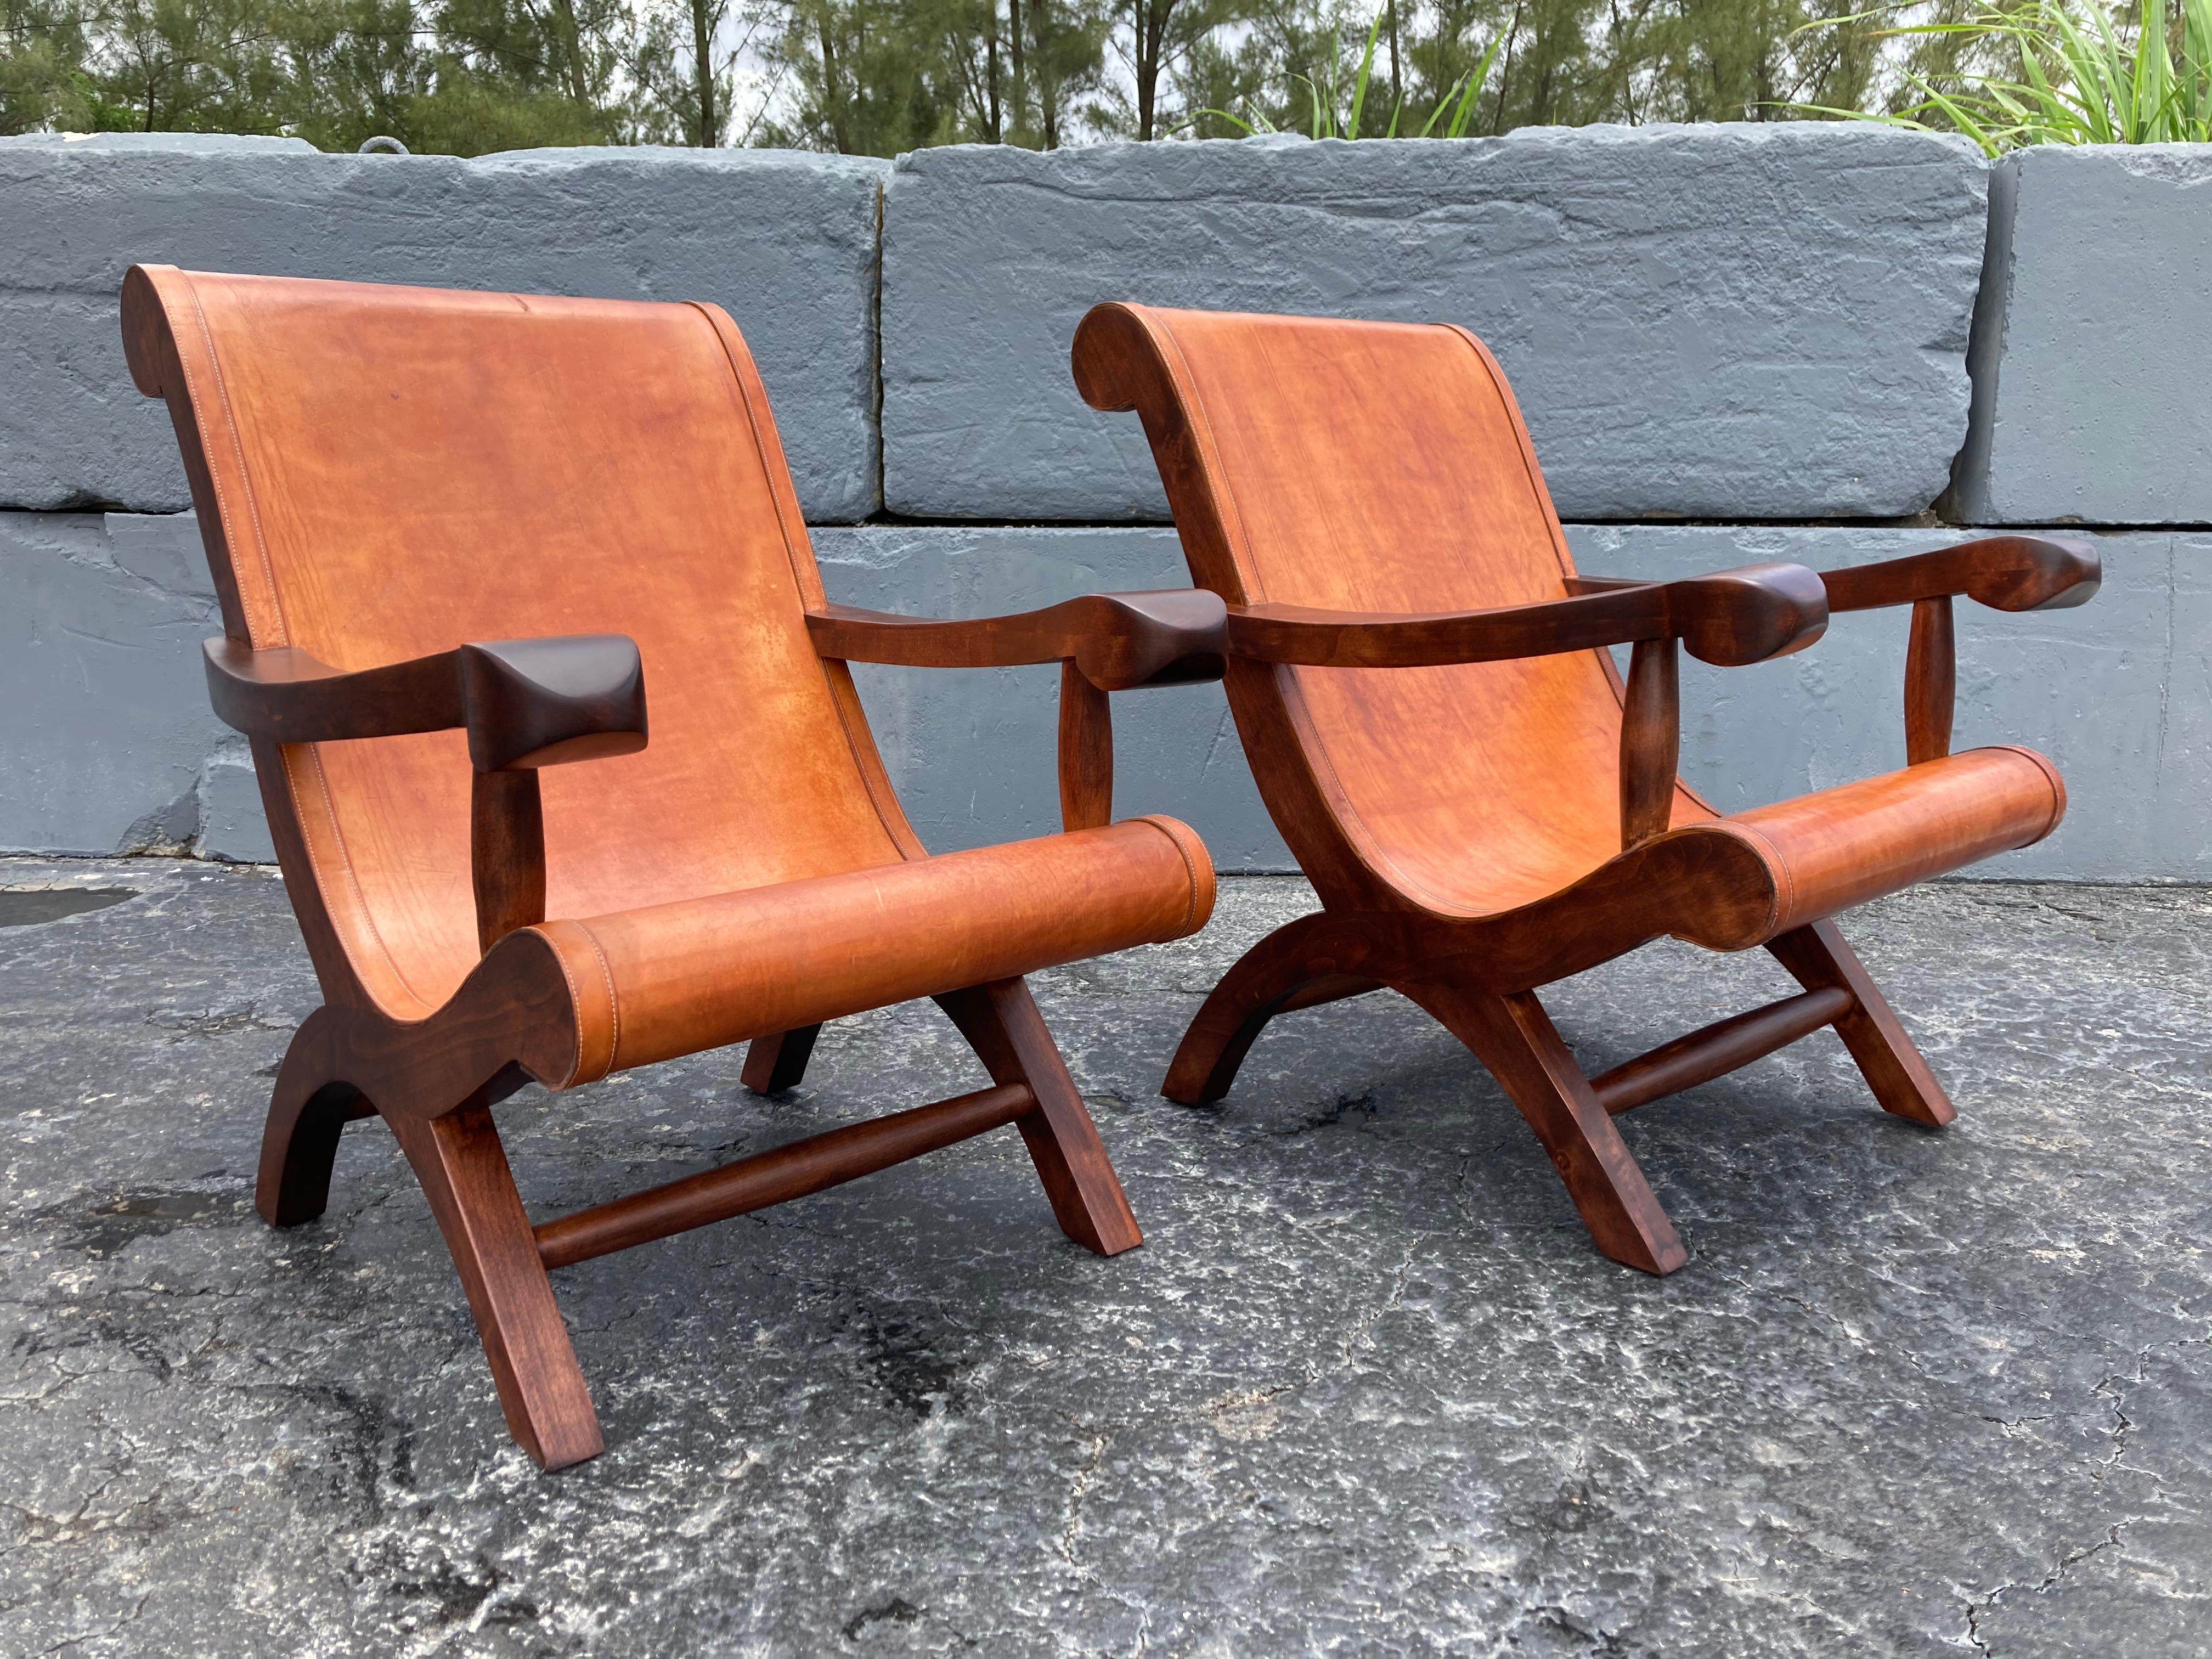 Great pair of lounge chairs, saddle leather has a great patina. Ready for a new home.